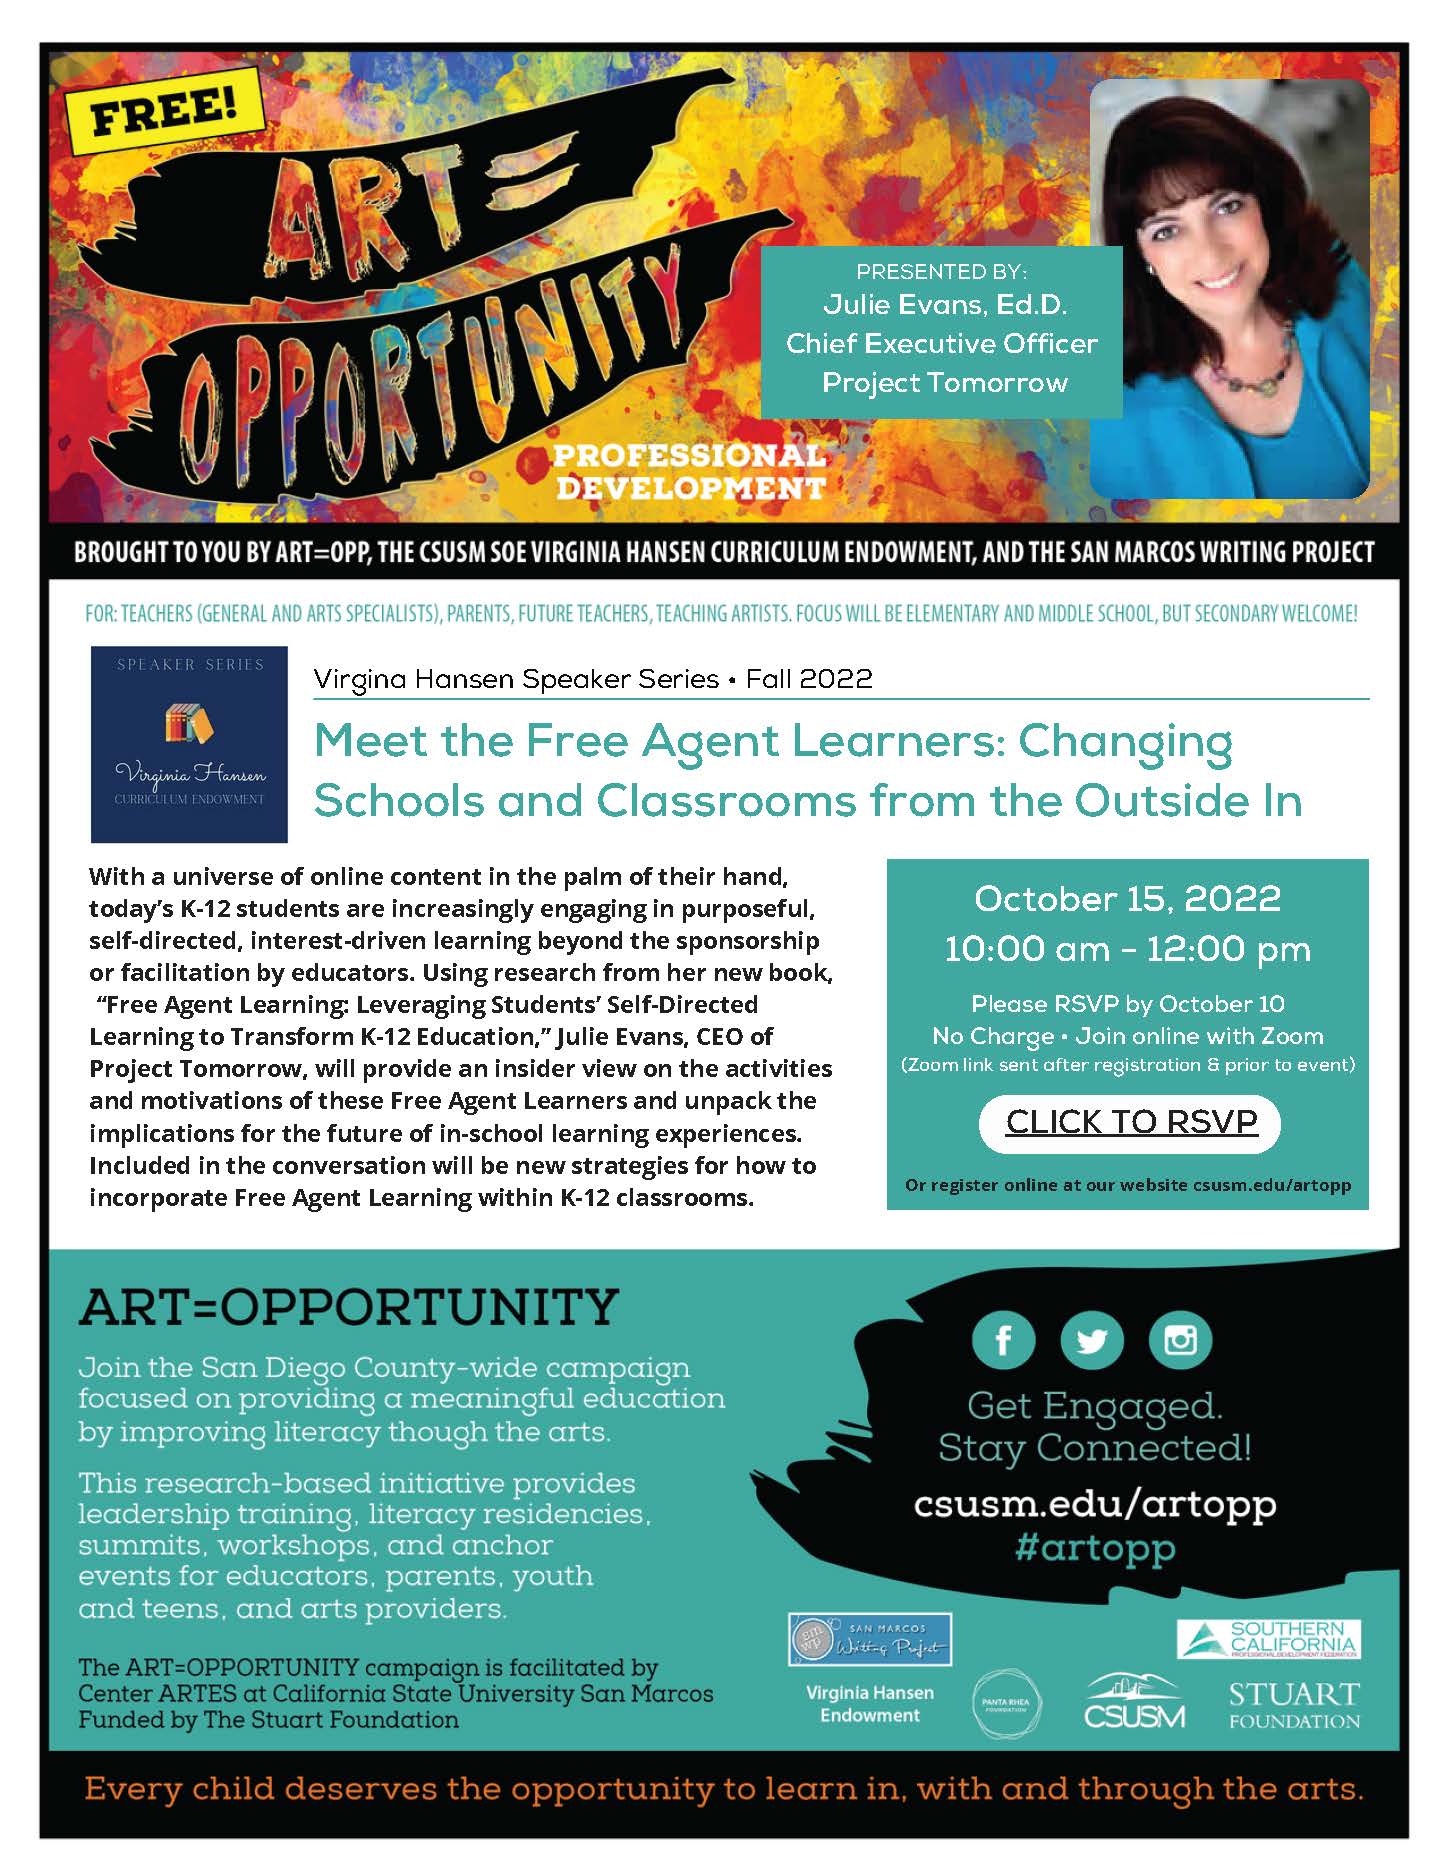 Flyer for Meet the Free Agent Learners: Changing Schools and Classrooms from the Outside In event